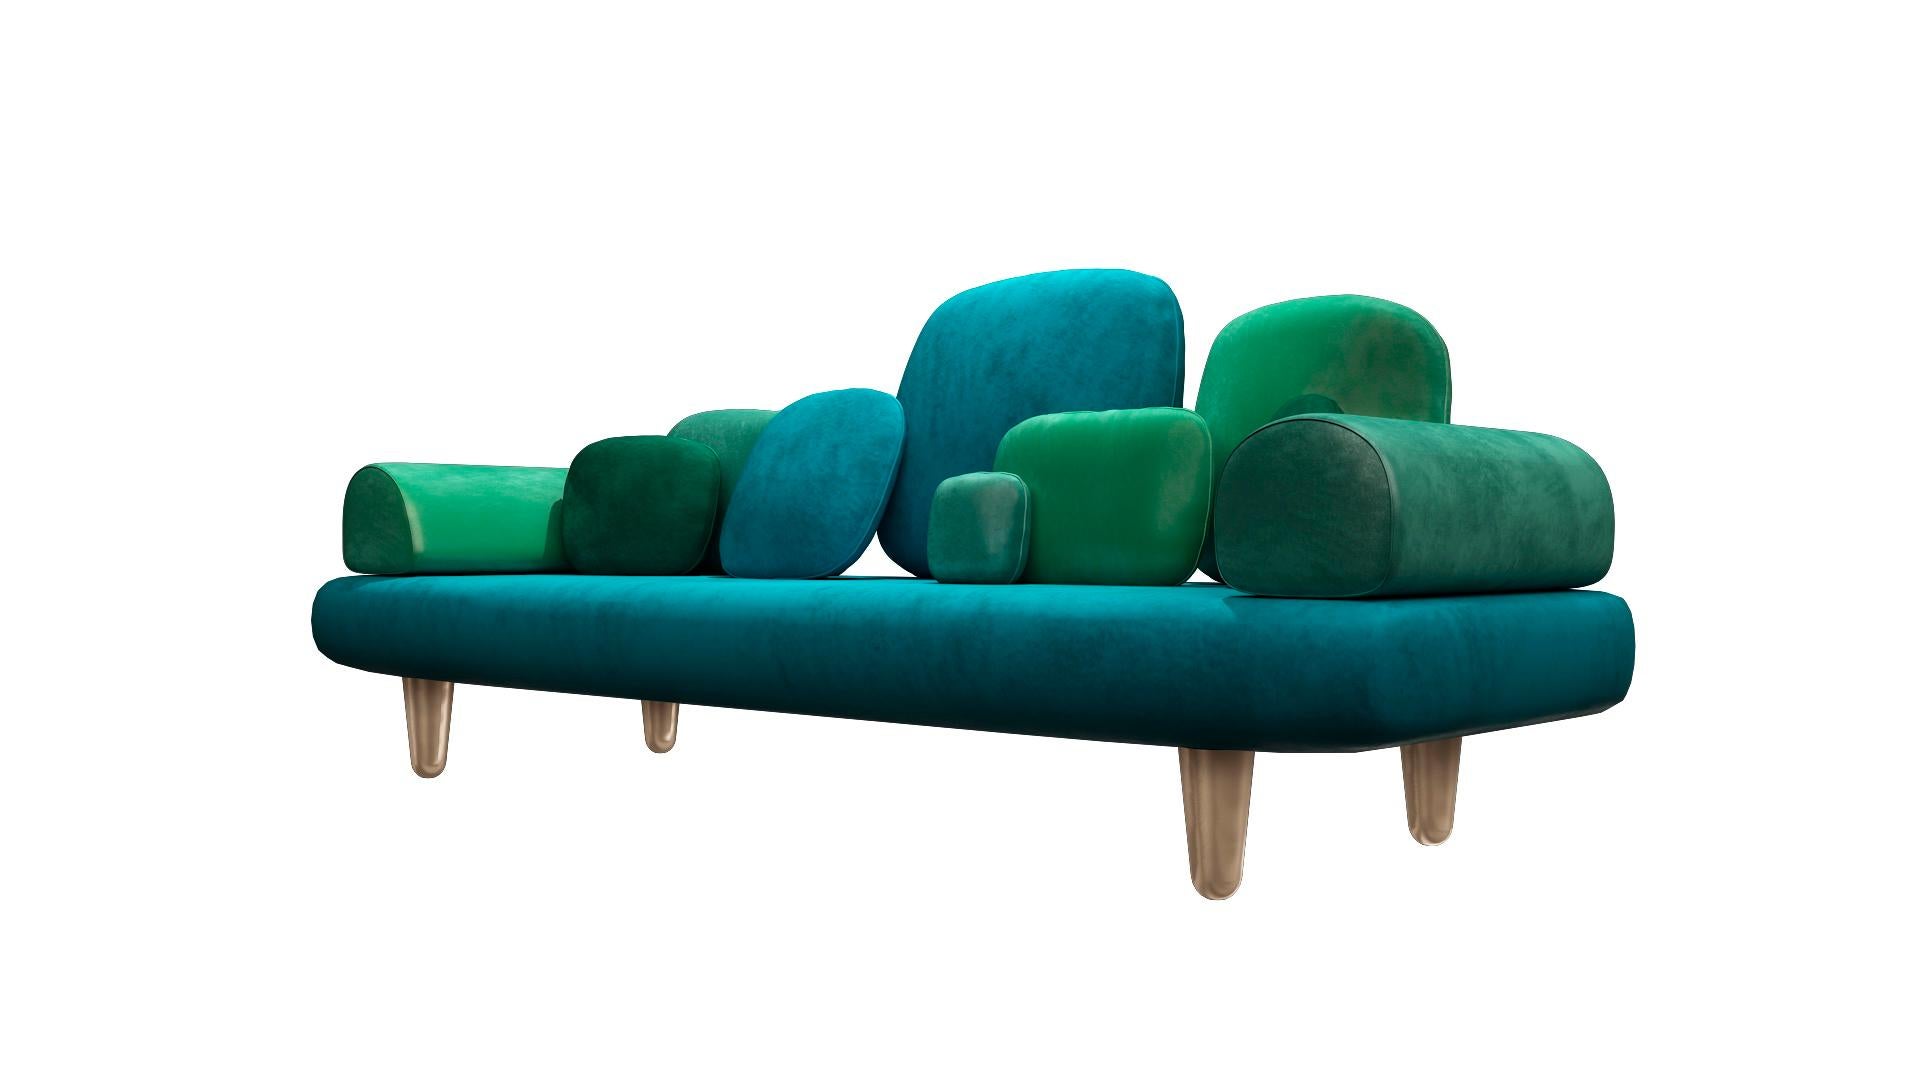 Forest 3-seat sofa with plush green velvet by Marcantonio, is a comfortable three-seat sofa with an array of cushions in a variety of green velvets.

For his debut creations, Marcantonio introduced “Vegetal Animal”, a concept that evokes strong